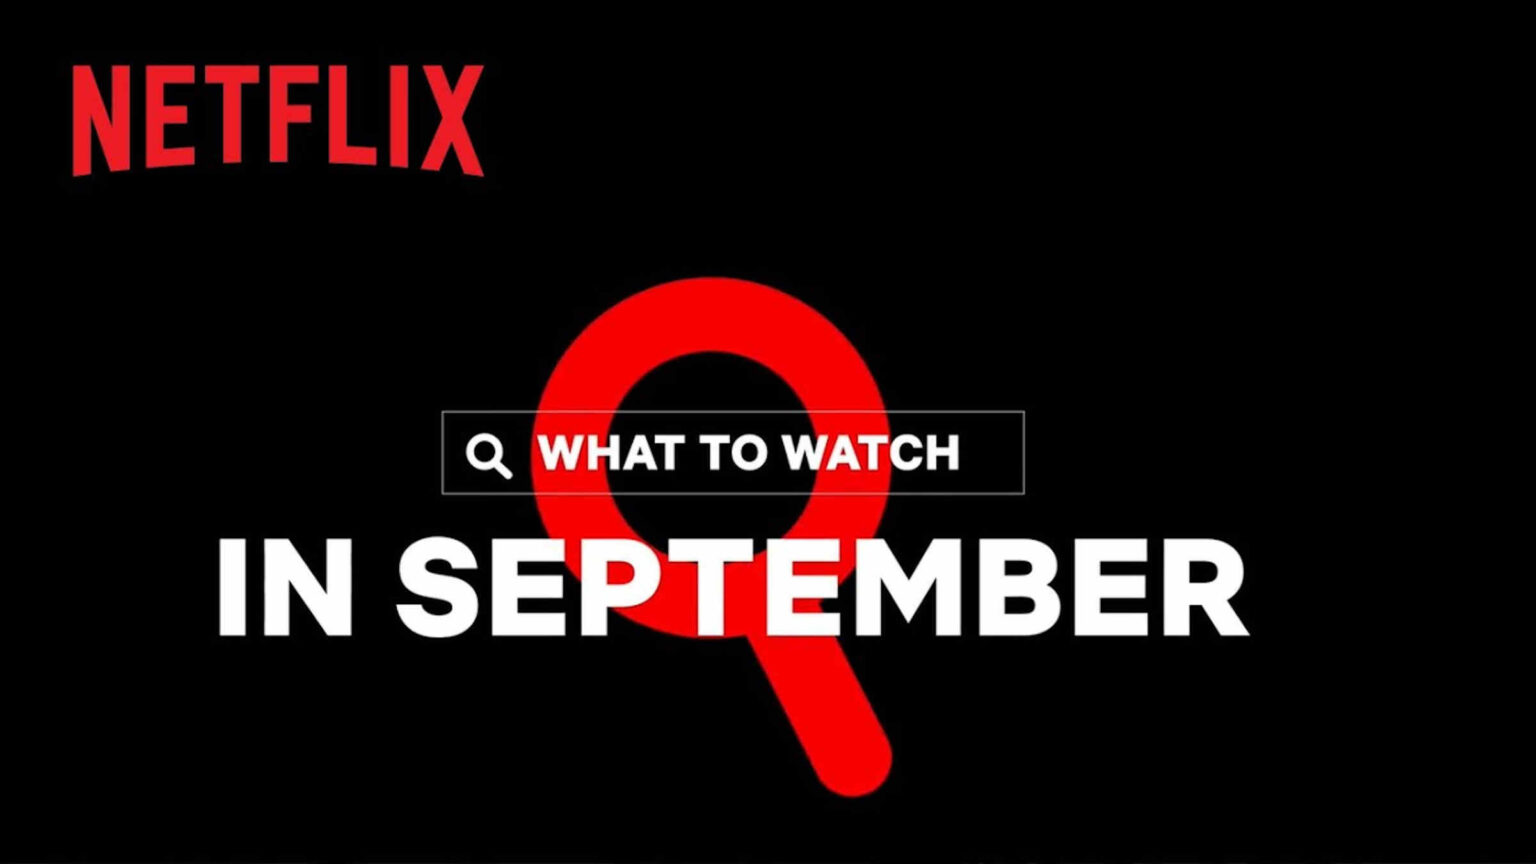 It's the best time of the month! New shows are coming to Netflix, meaning more thrillers, comedies, K-drama, and cooking shows for use to binge.hows are coming to Netflix, meaning more thrillers, comedies, k-drama, and cooking shows for use to binge.